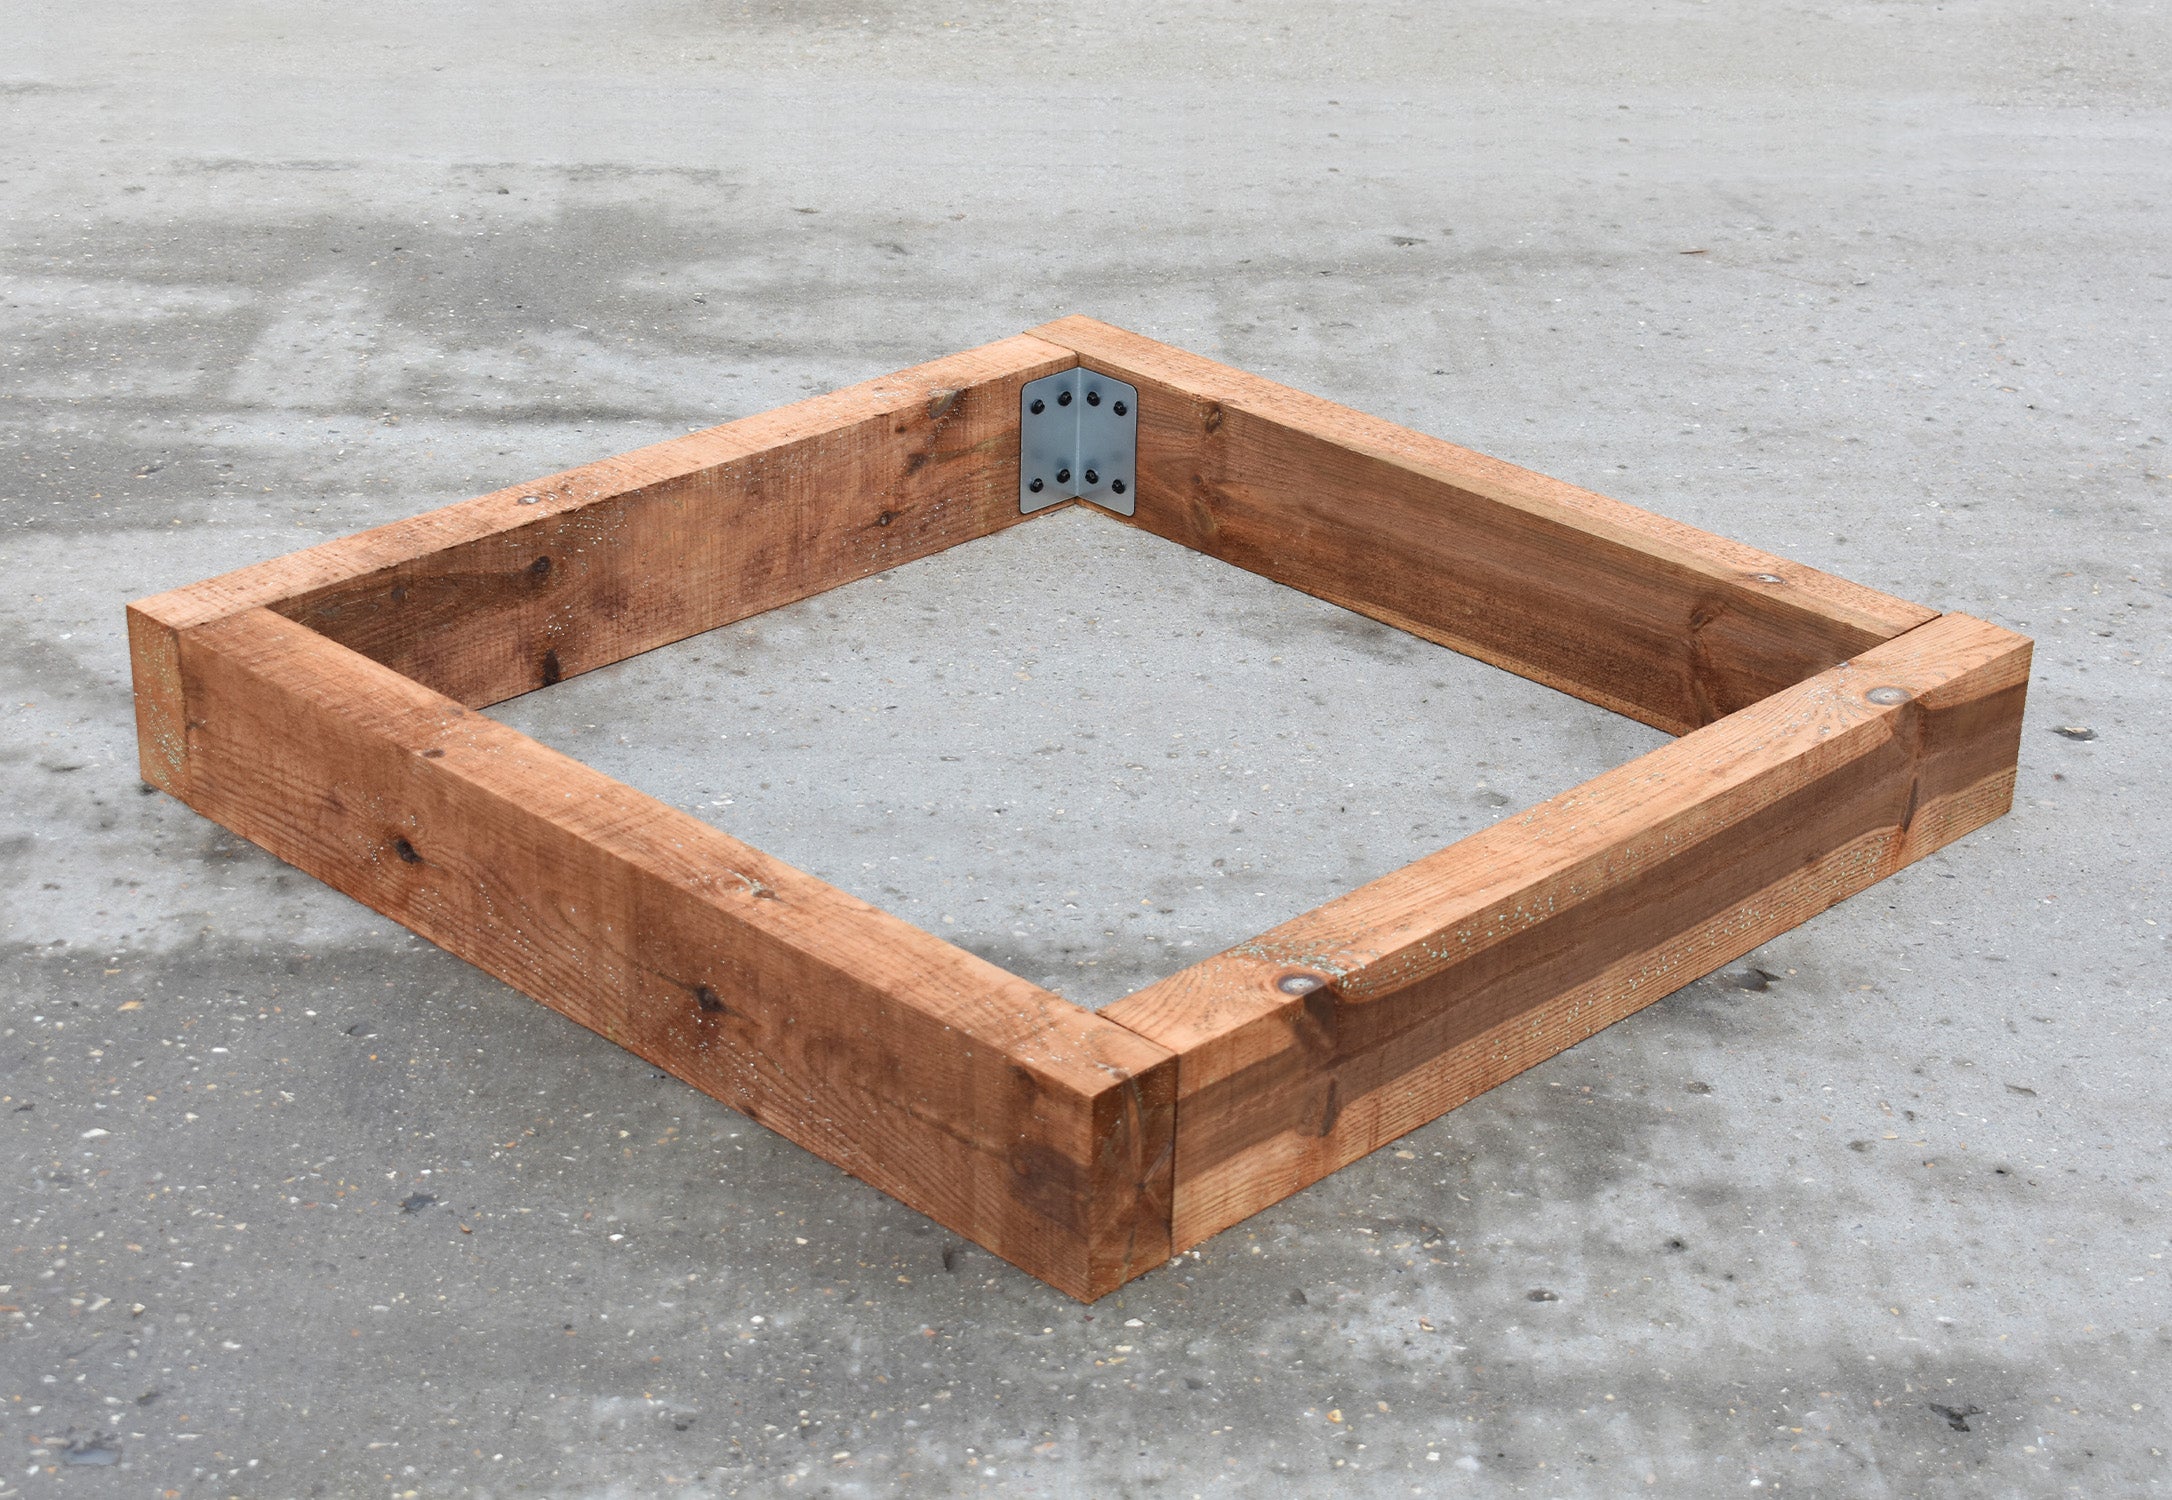 1-Tier Square Planter using a SleeperFit Installation Kit featuring Brackets, Timber Railway Sleepers and Screws